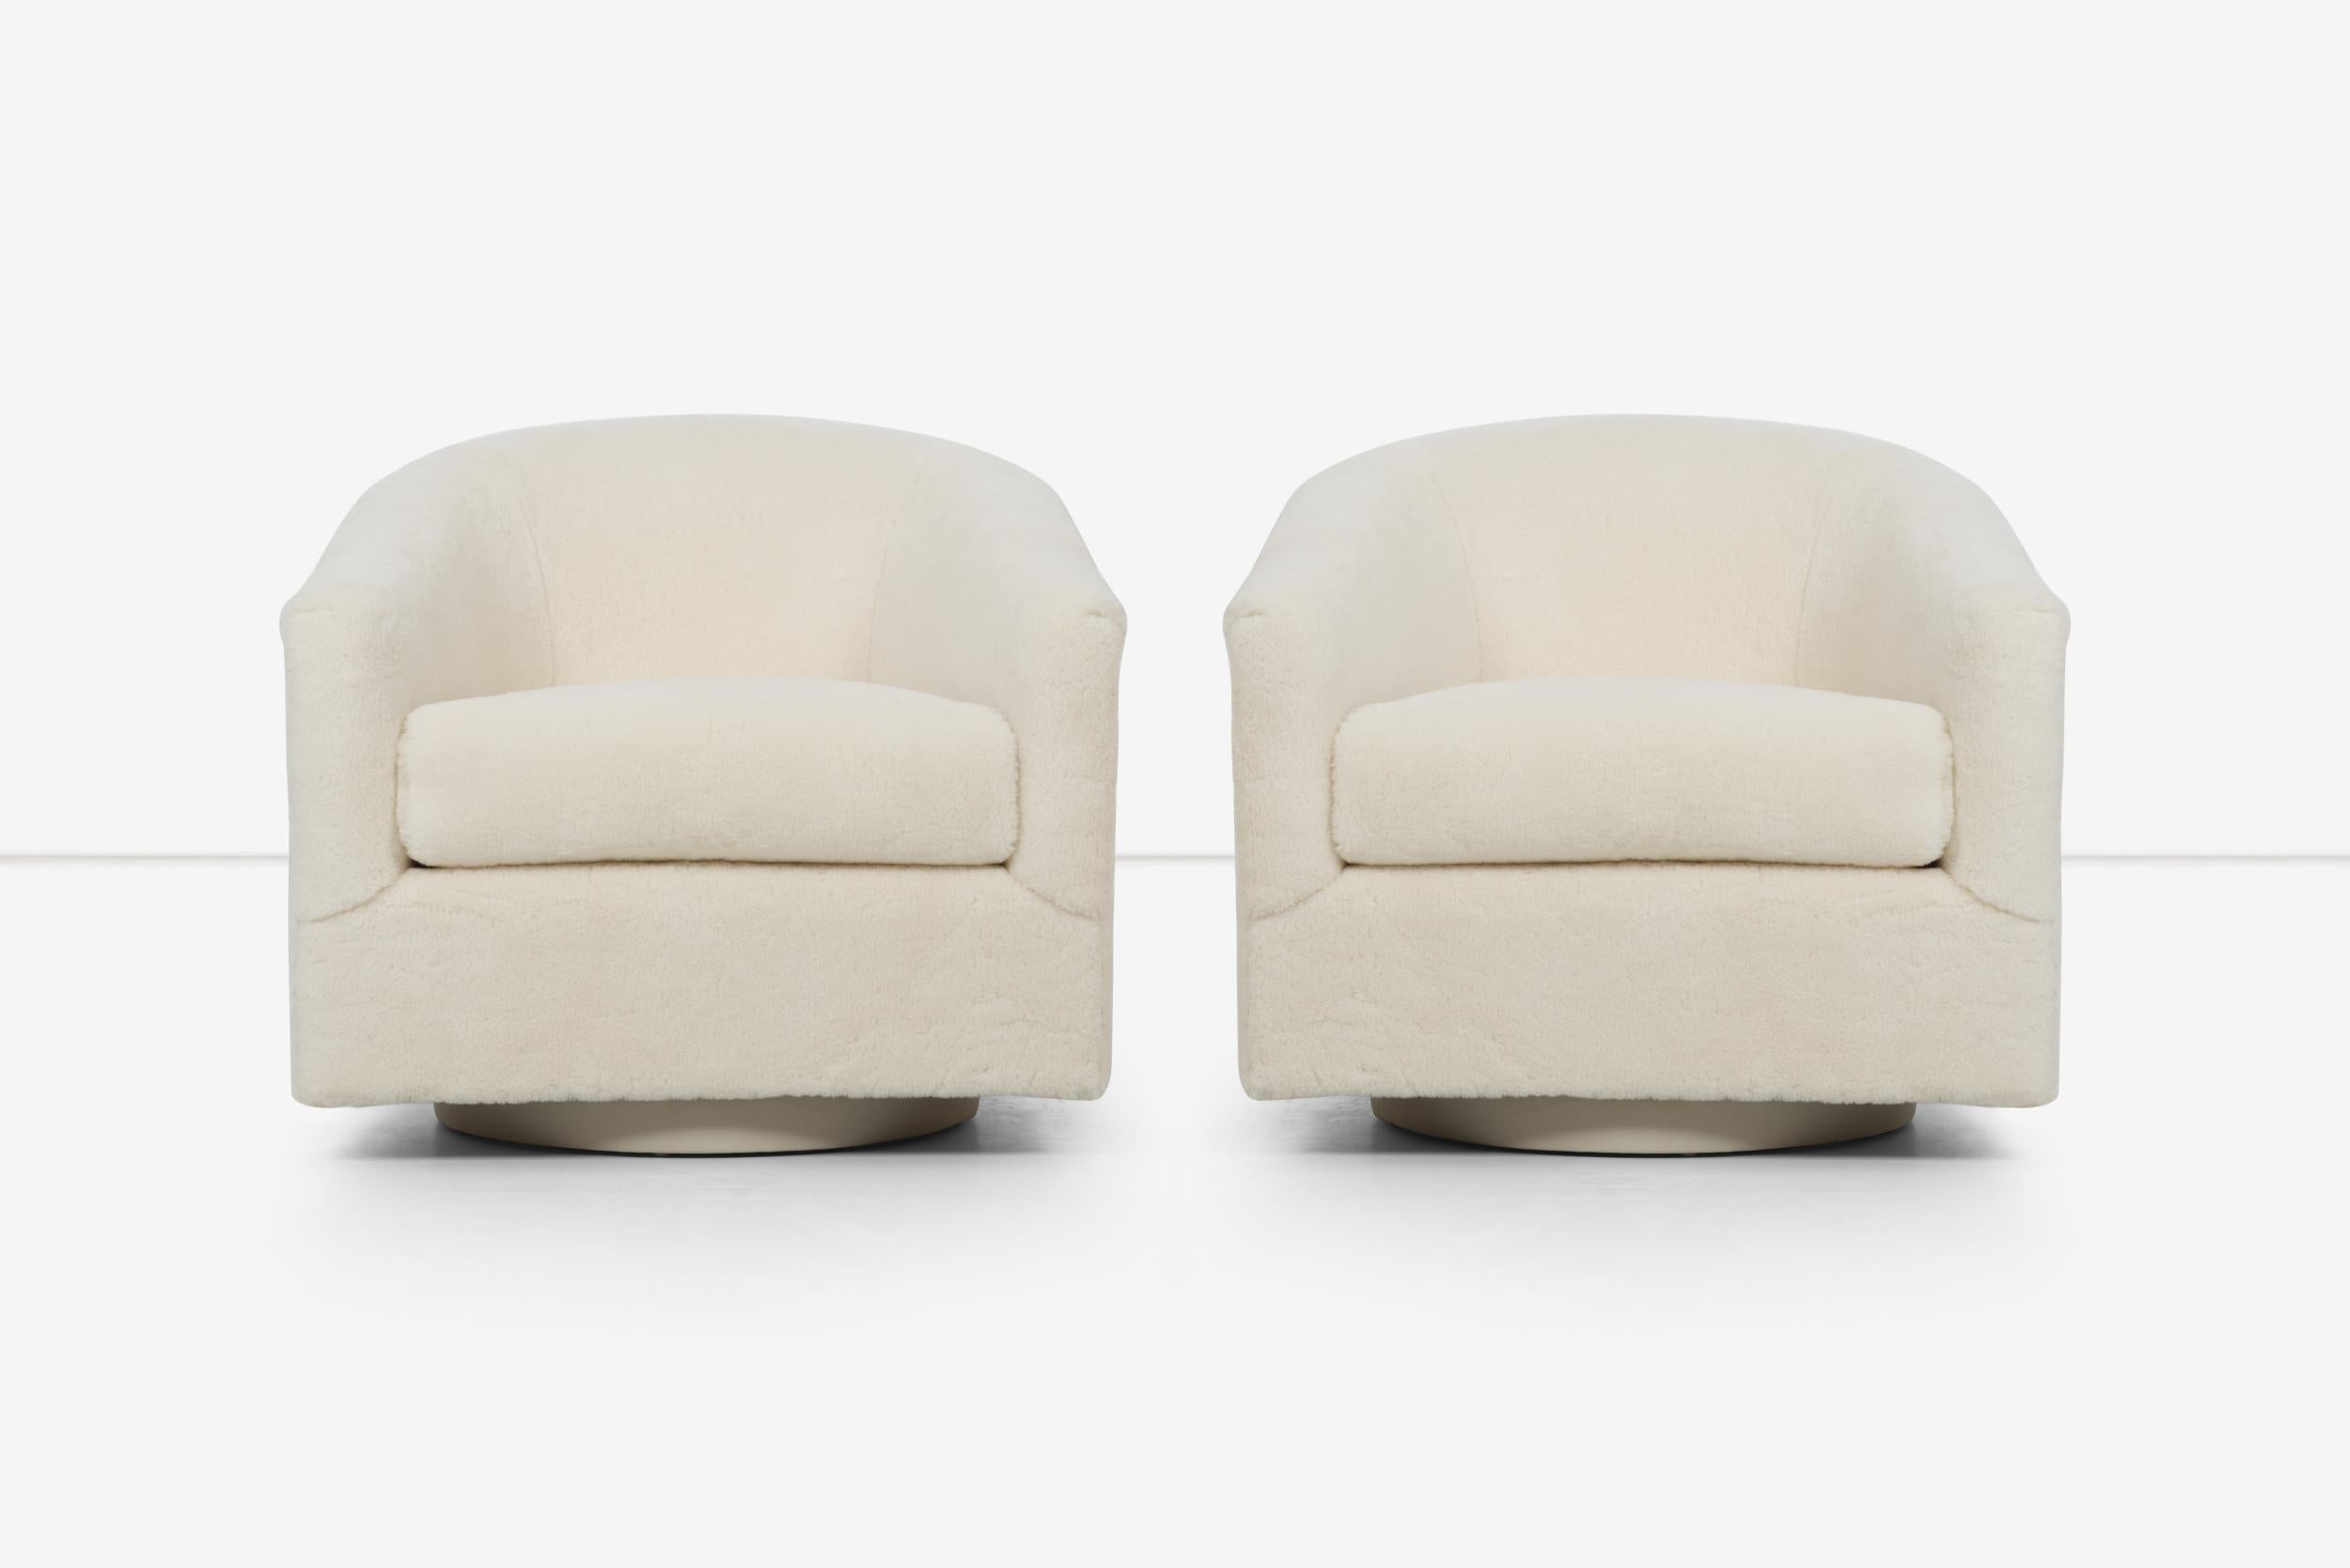 Pair of Milo Baughman swivel lounge chairs, reupholstered in thick shearling: Winter white 100% wool, with leather wrapped bases.